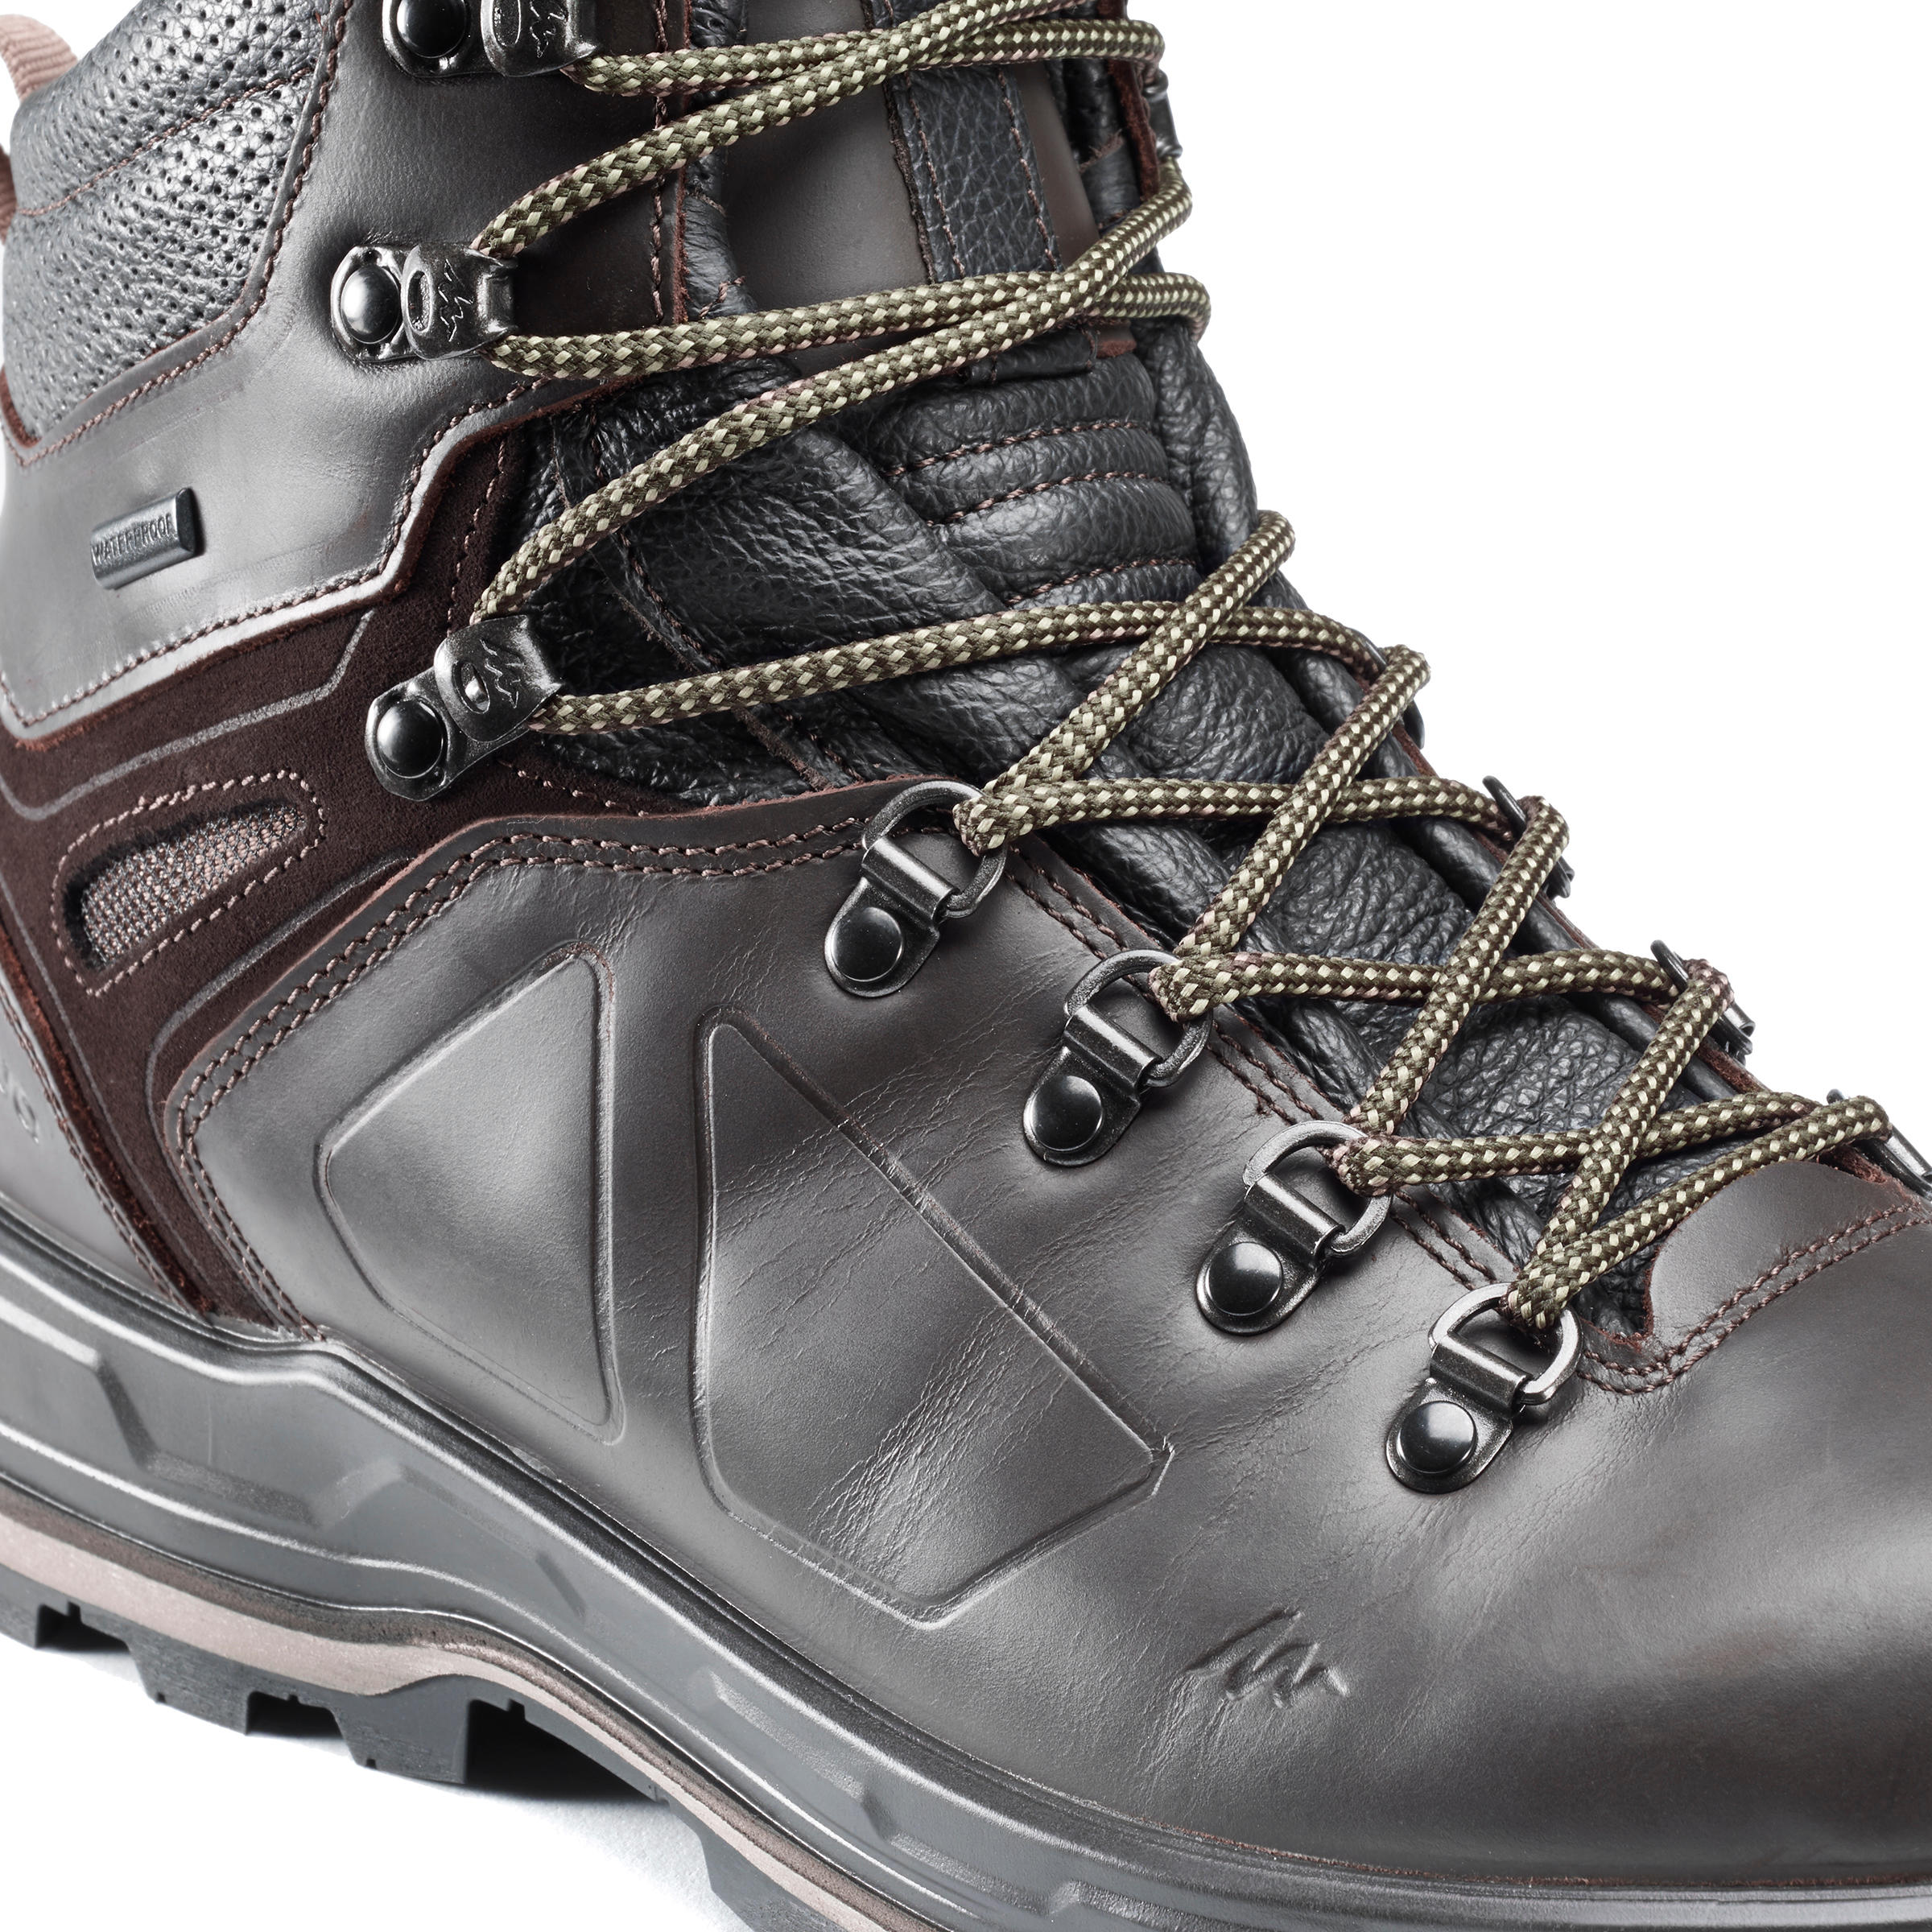 decathlon safety shoes